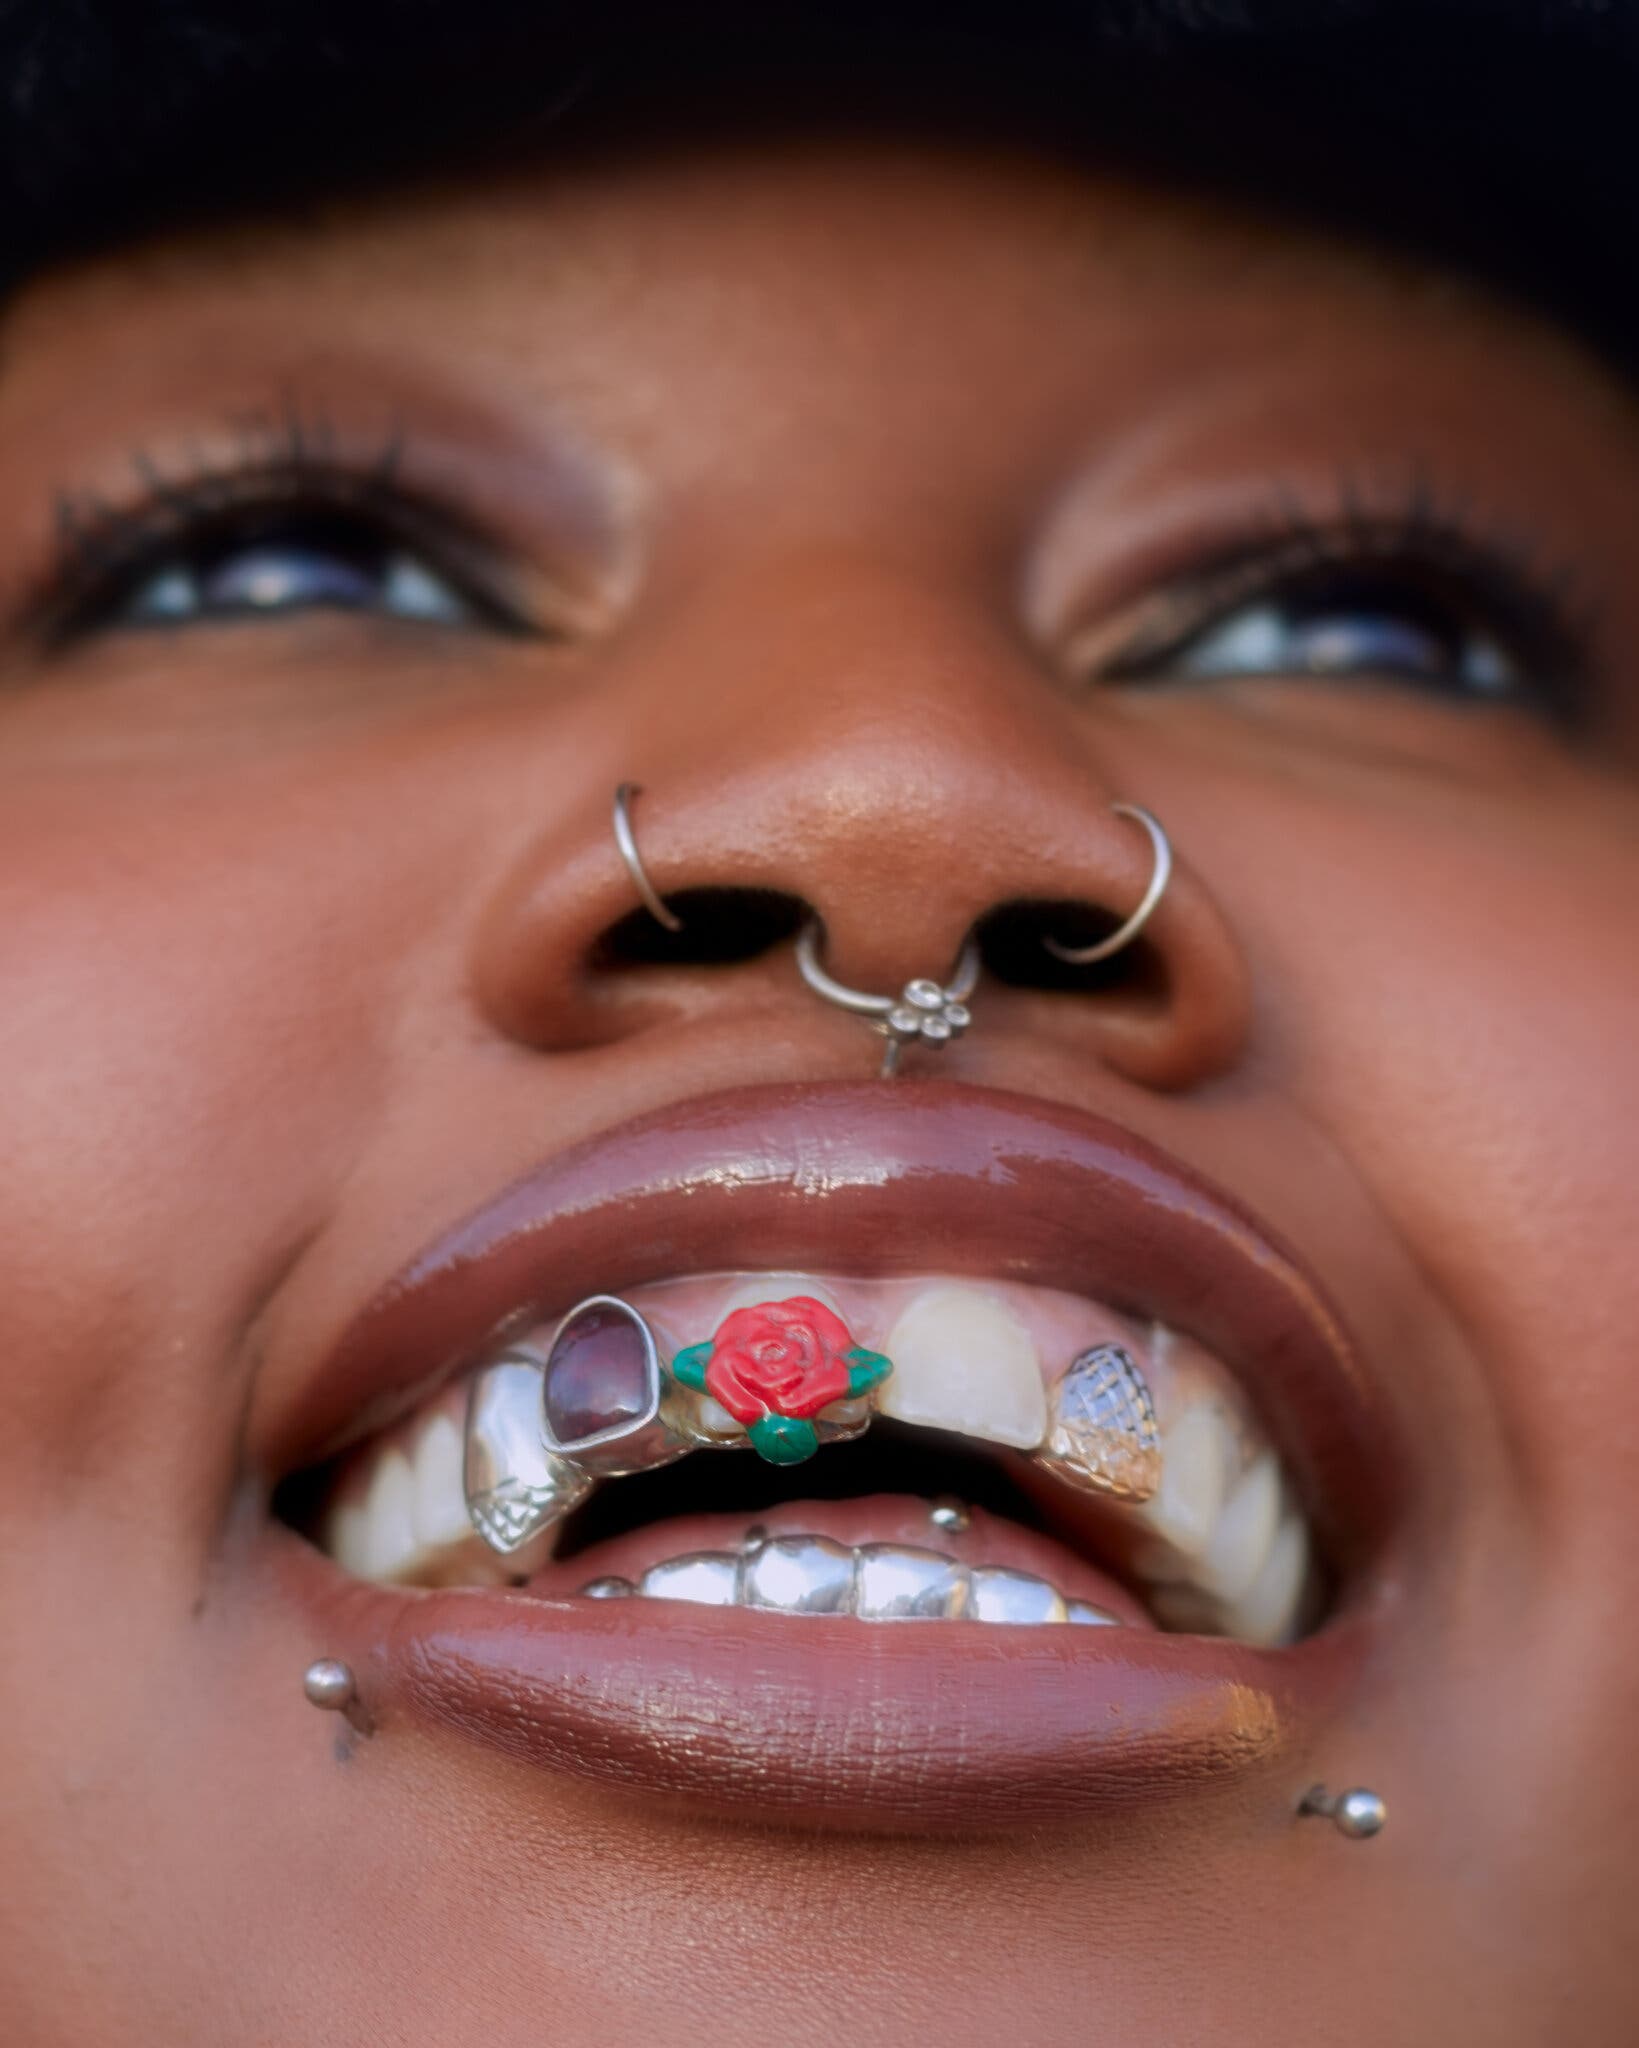 A close-up portrait of a dark-skinned woman, focused on her mouth. She wears multiple, intricate grills over her teeth. One is a red rose with green leaves, the others are different light colors or silver. She smiles widely to show off the pieces and has three nose and two lower-lip piercings. Her lips are perfectly glossed in a coffee color.